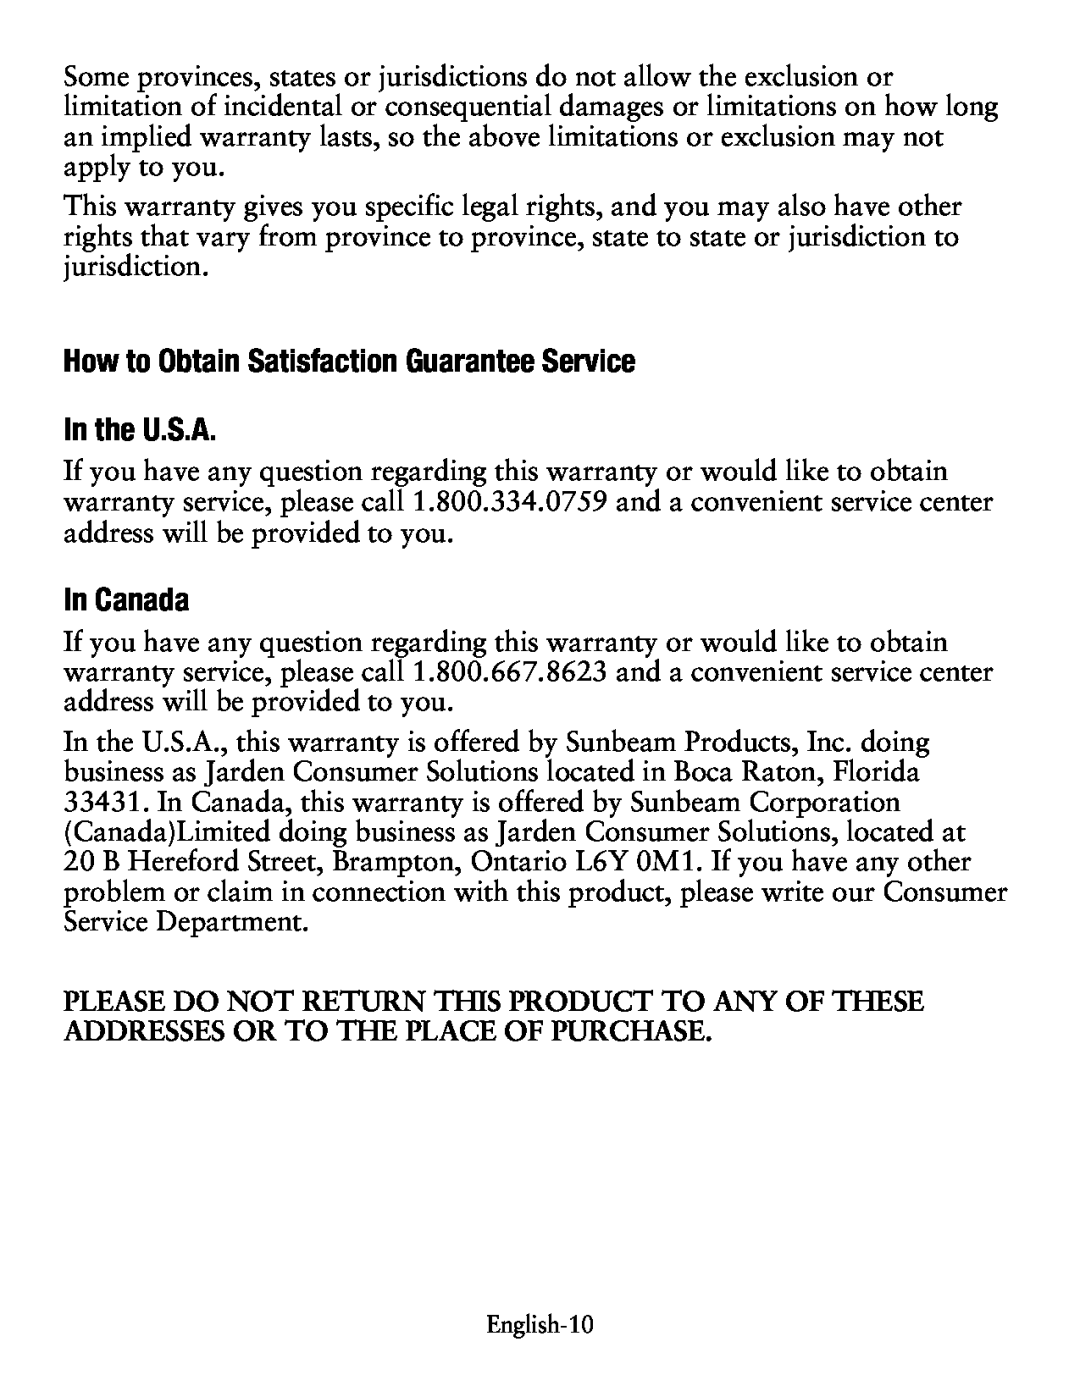 Oster Small Digital Oven, TSSTTVDGSM How to Obtain Satisfaction Guarantee Service In the U.S.A, In Canada, English-10 